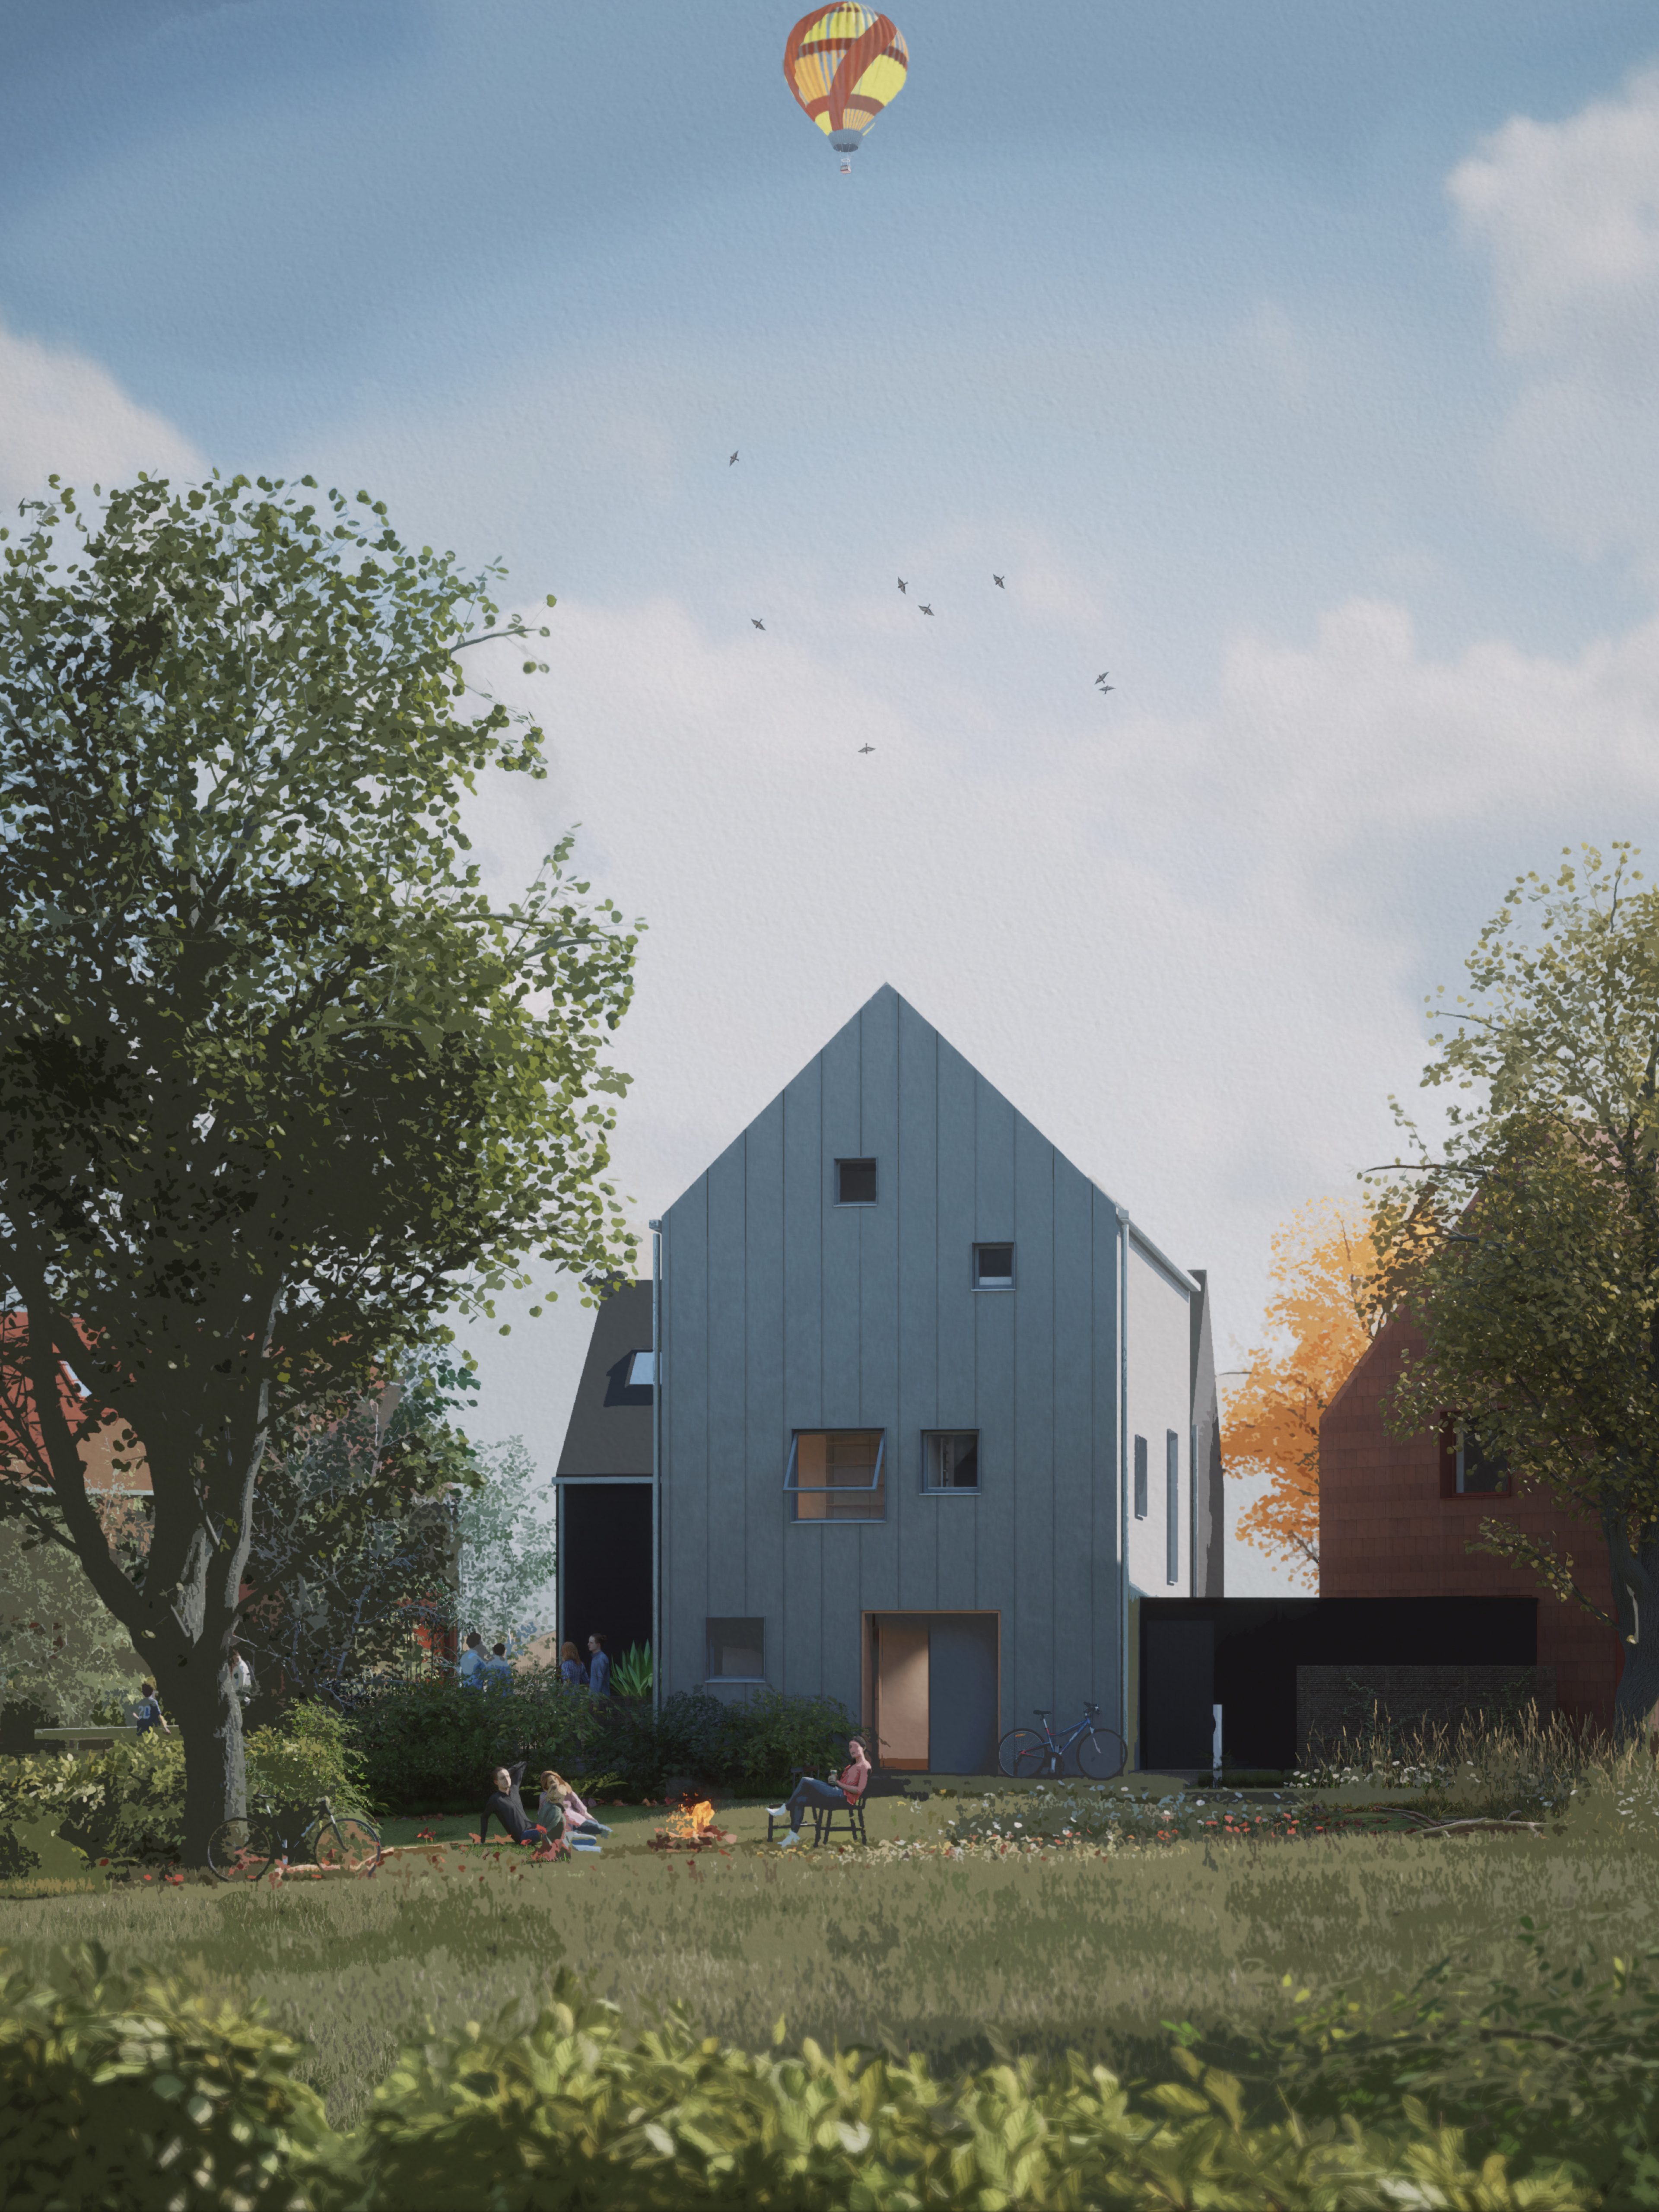 View from shared space showing two trees and house in the center, by CDC studio